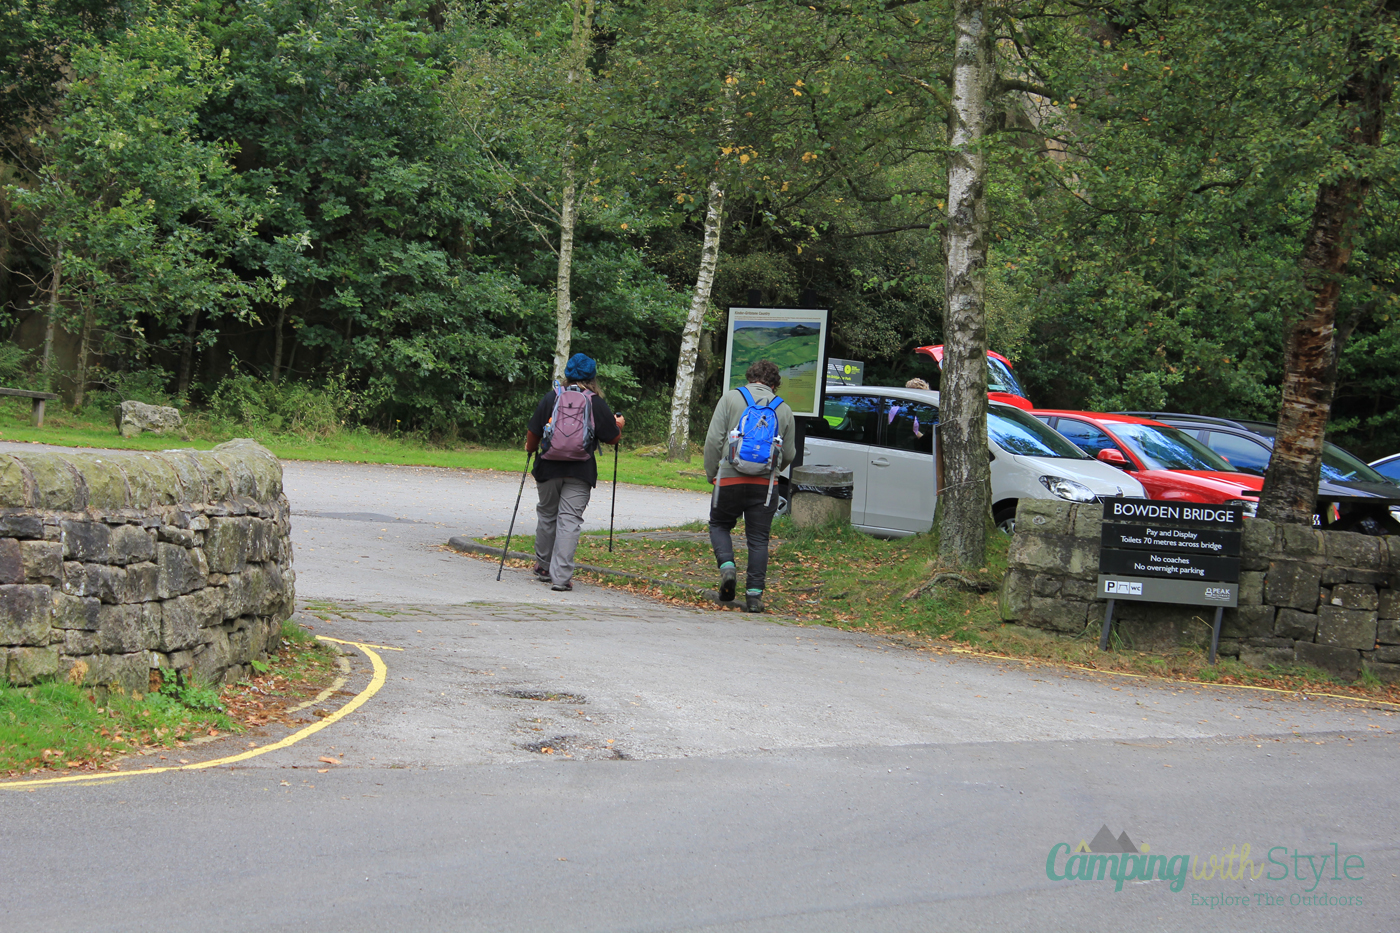 Bowden Bridge Carpark at the Start of the Walk Up Kinder Scout